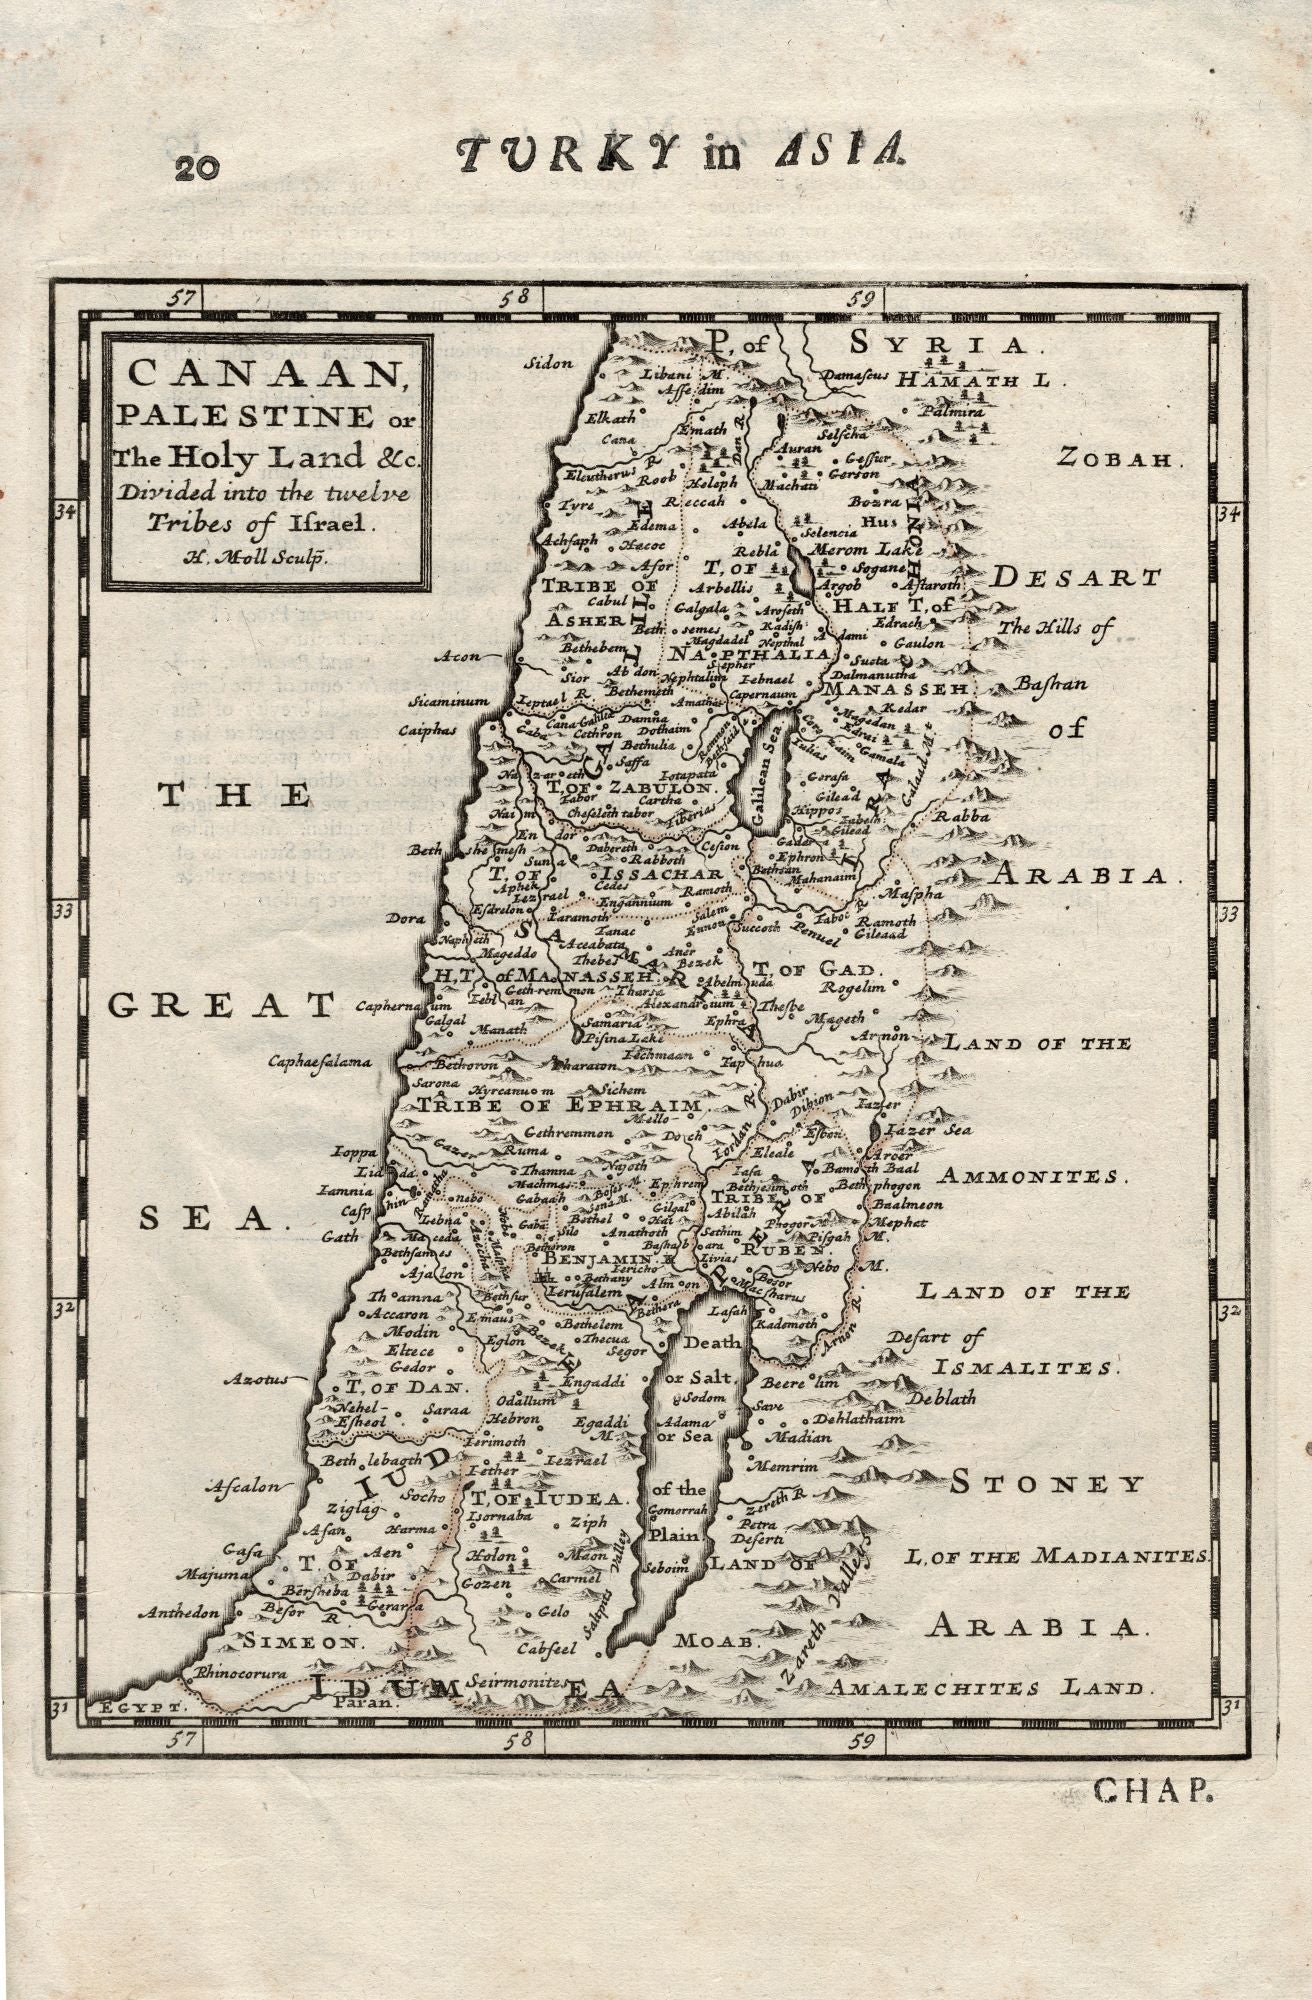 Canaan, Palestine or the Holy Land antique map published 1709